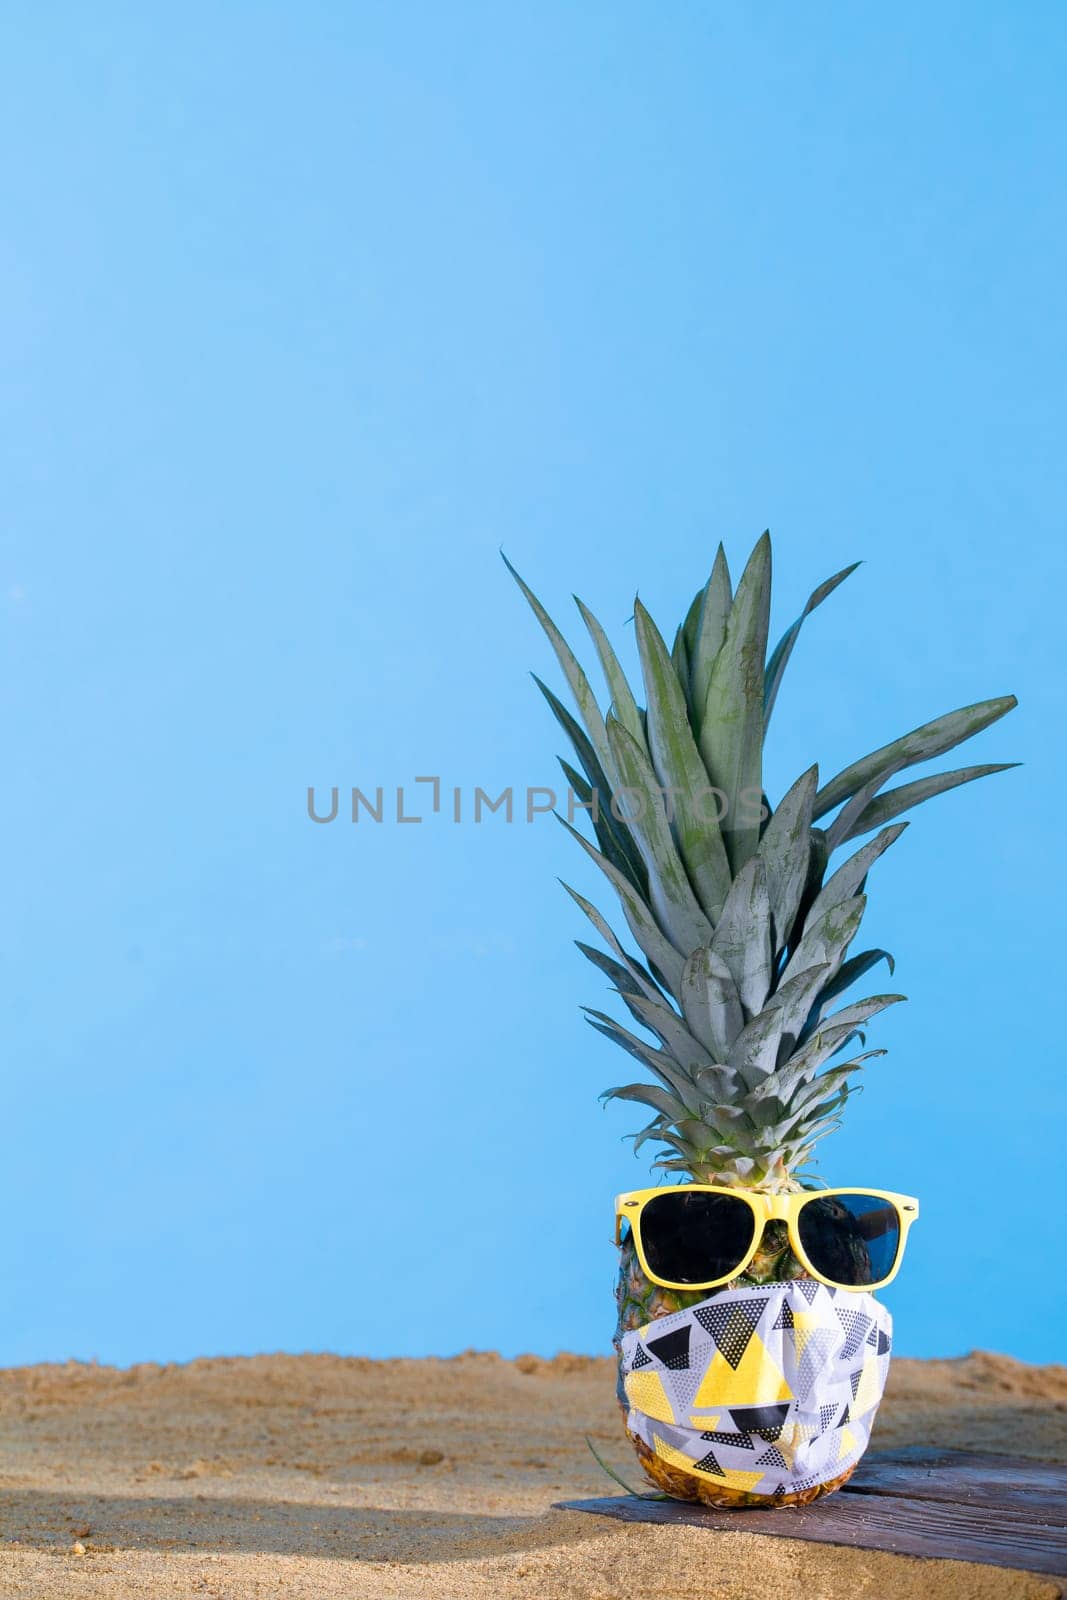 Ripe pineapple. Protective mask. Sunglasses with a yellow frame. Sea beach. Sunny day.